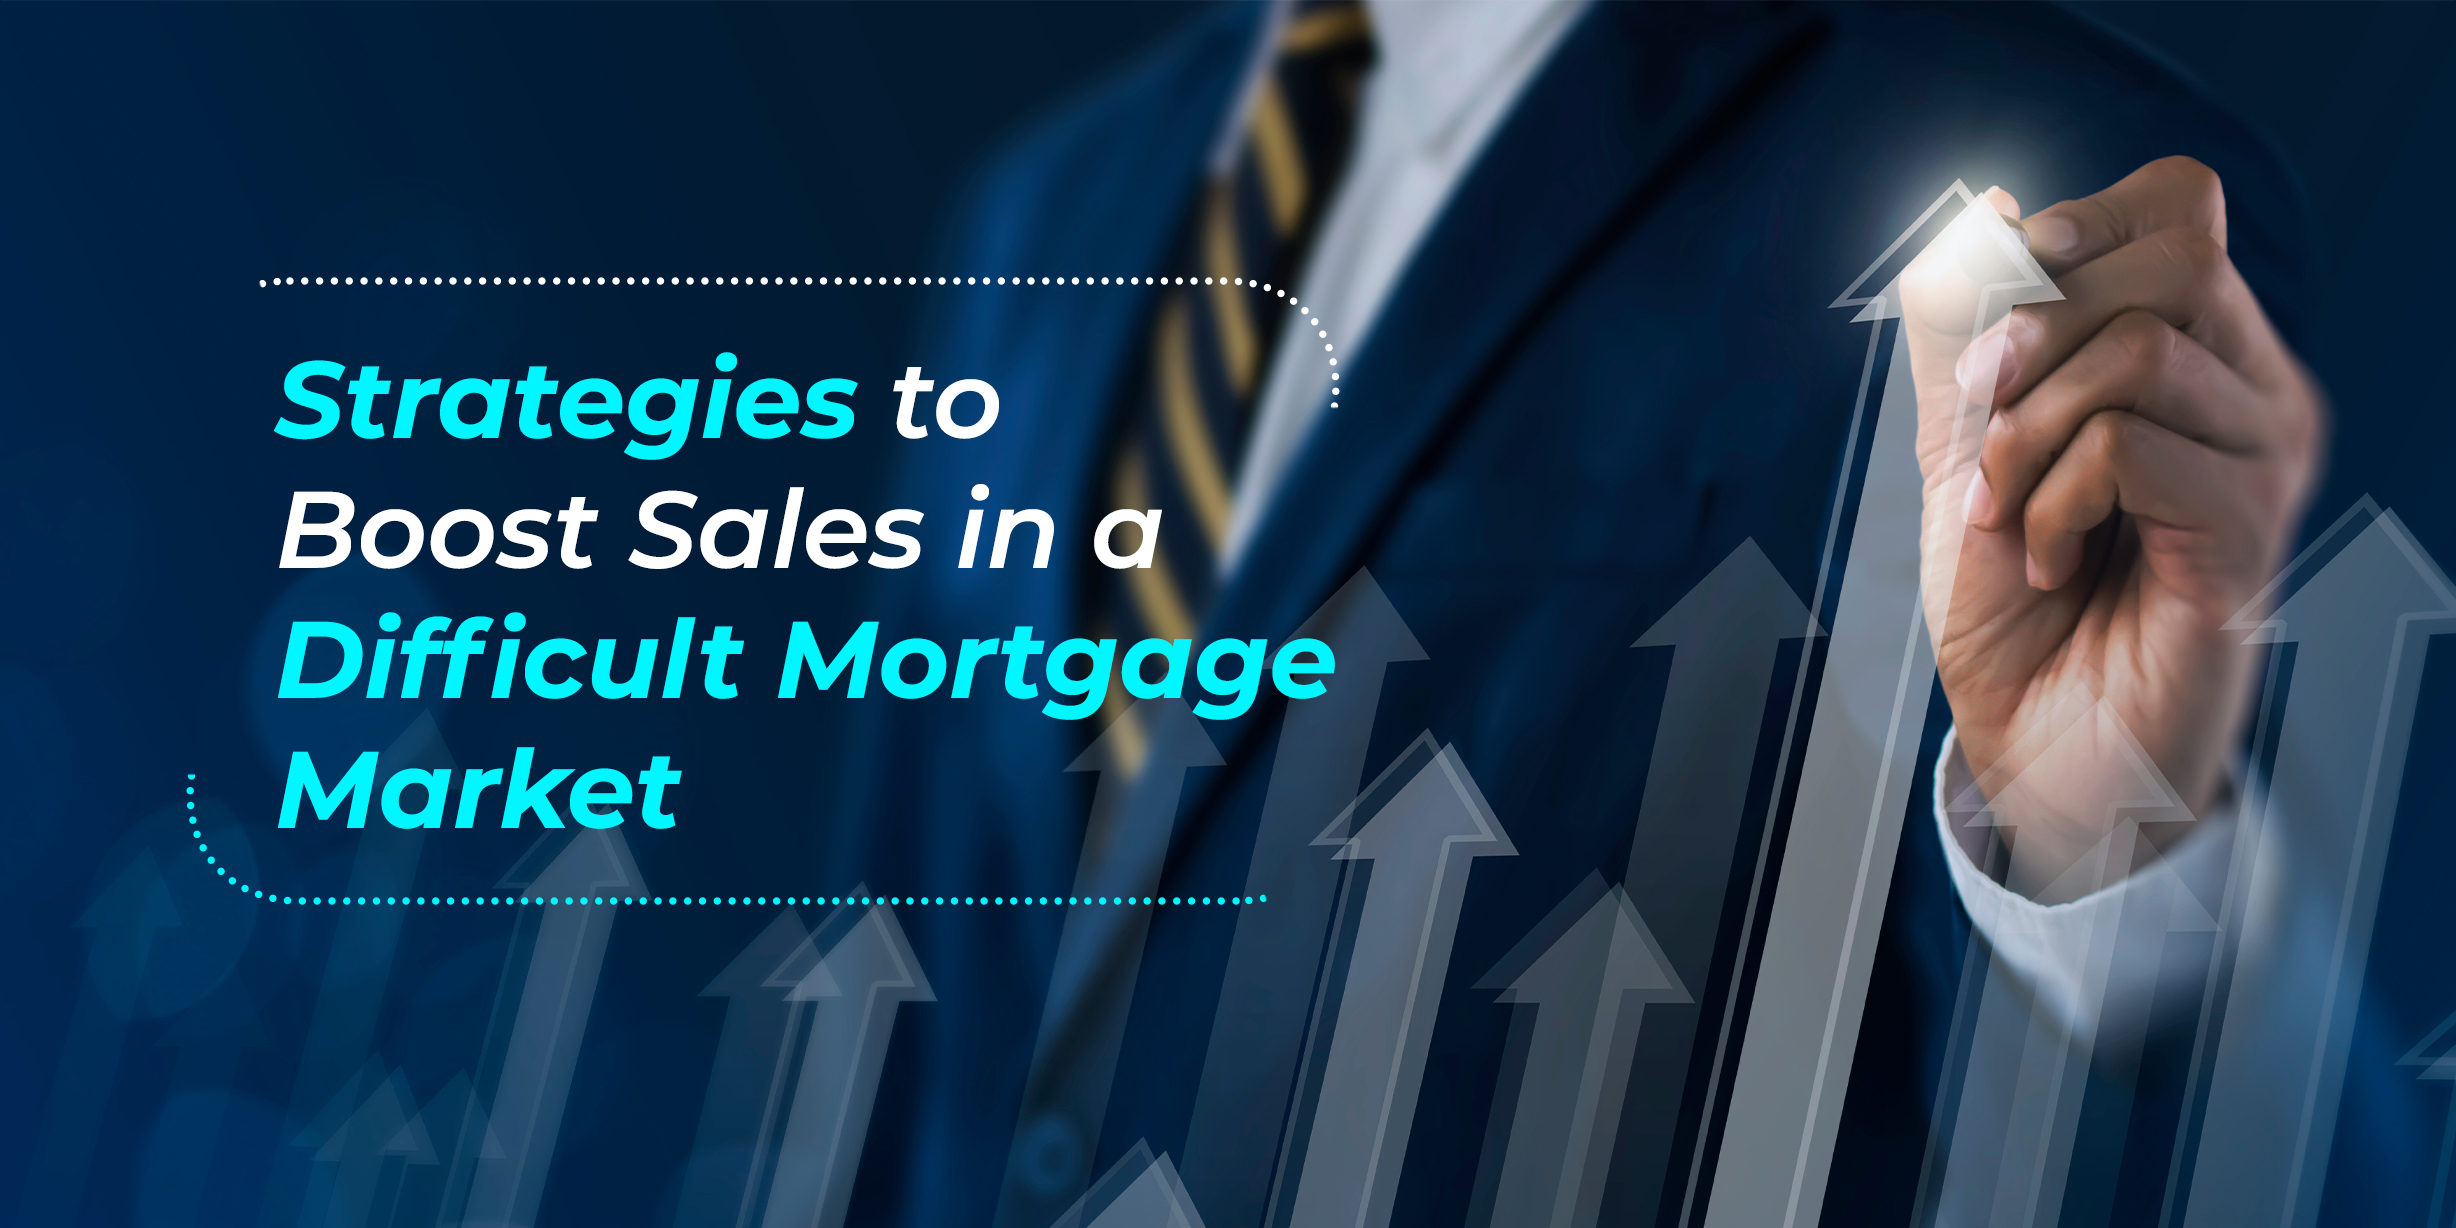 Strategies to Boost Sales in a Difficult Mortgage Market